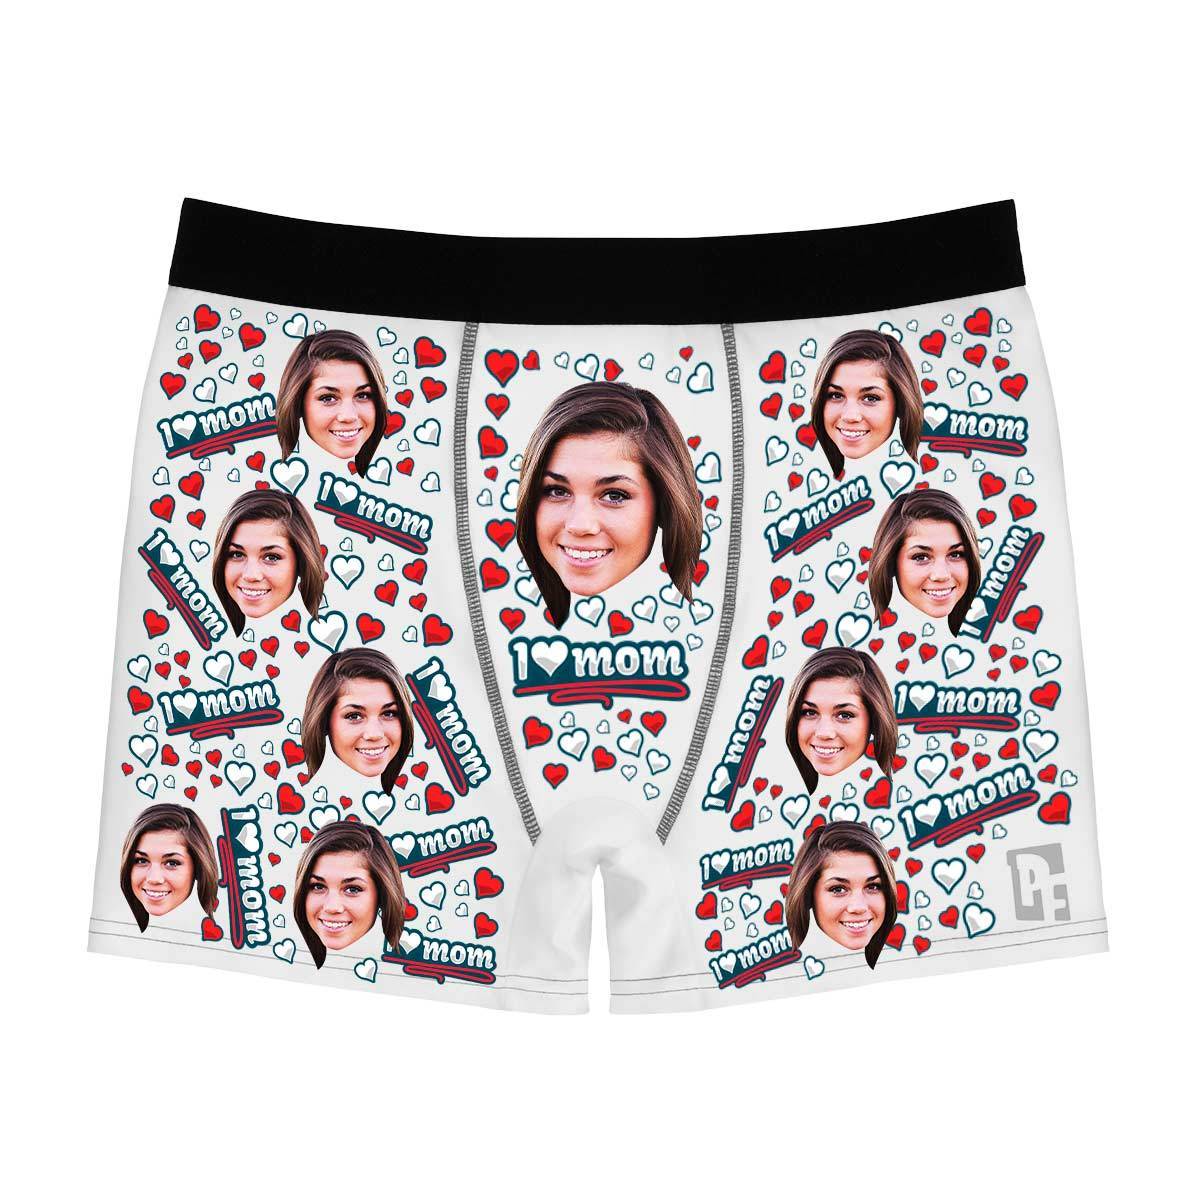 White Love mom men's boxer briefs personalized with photo printed on them